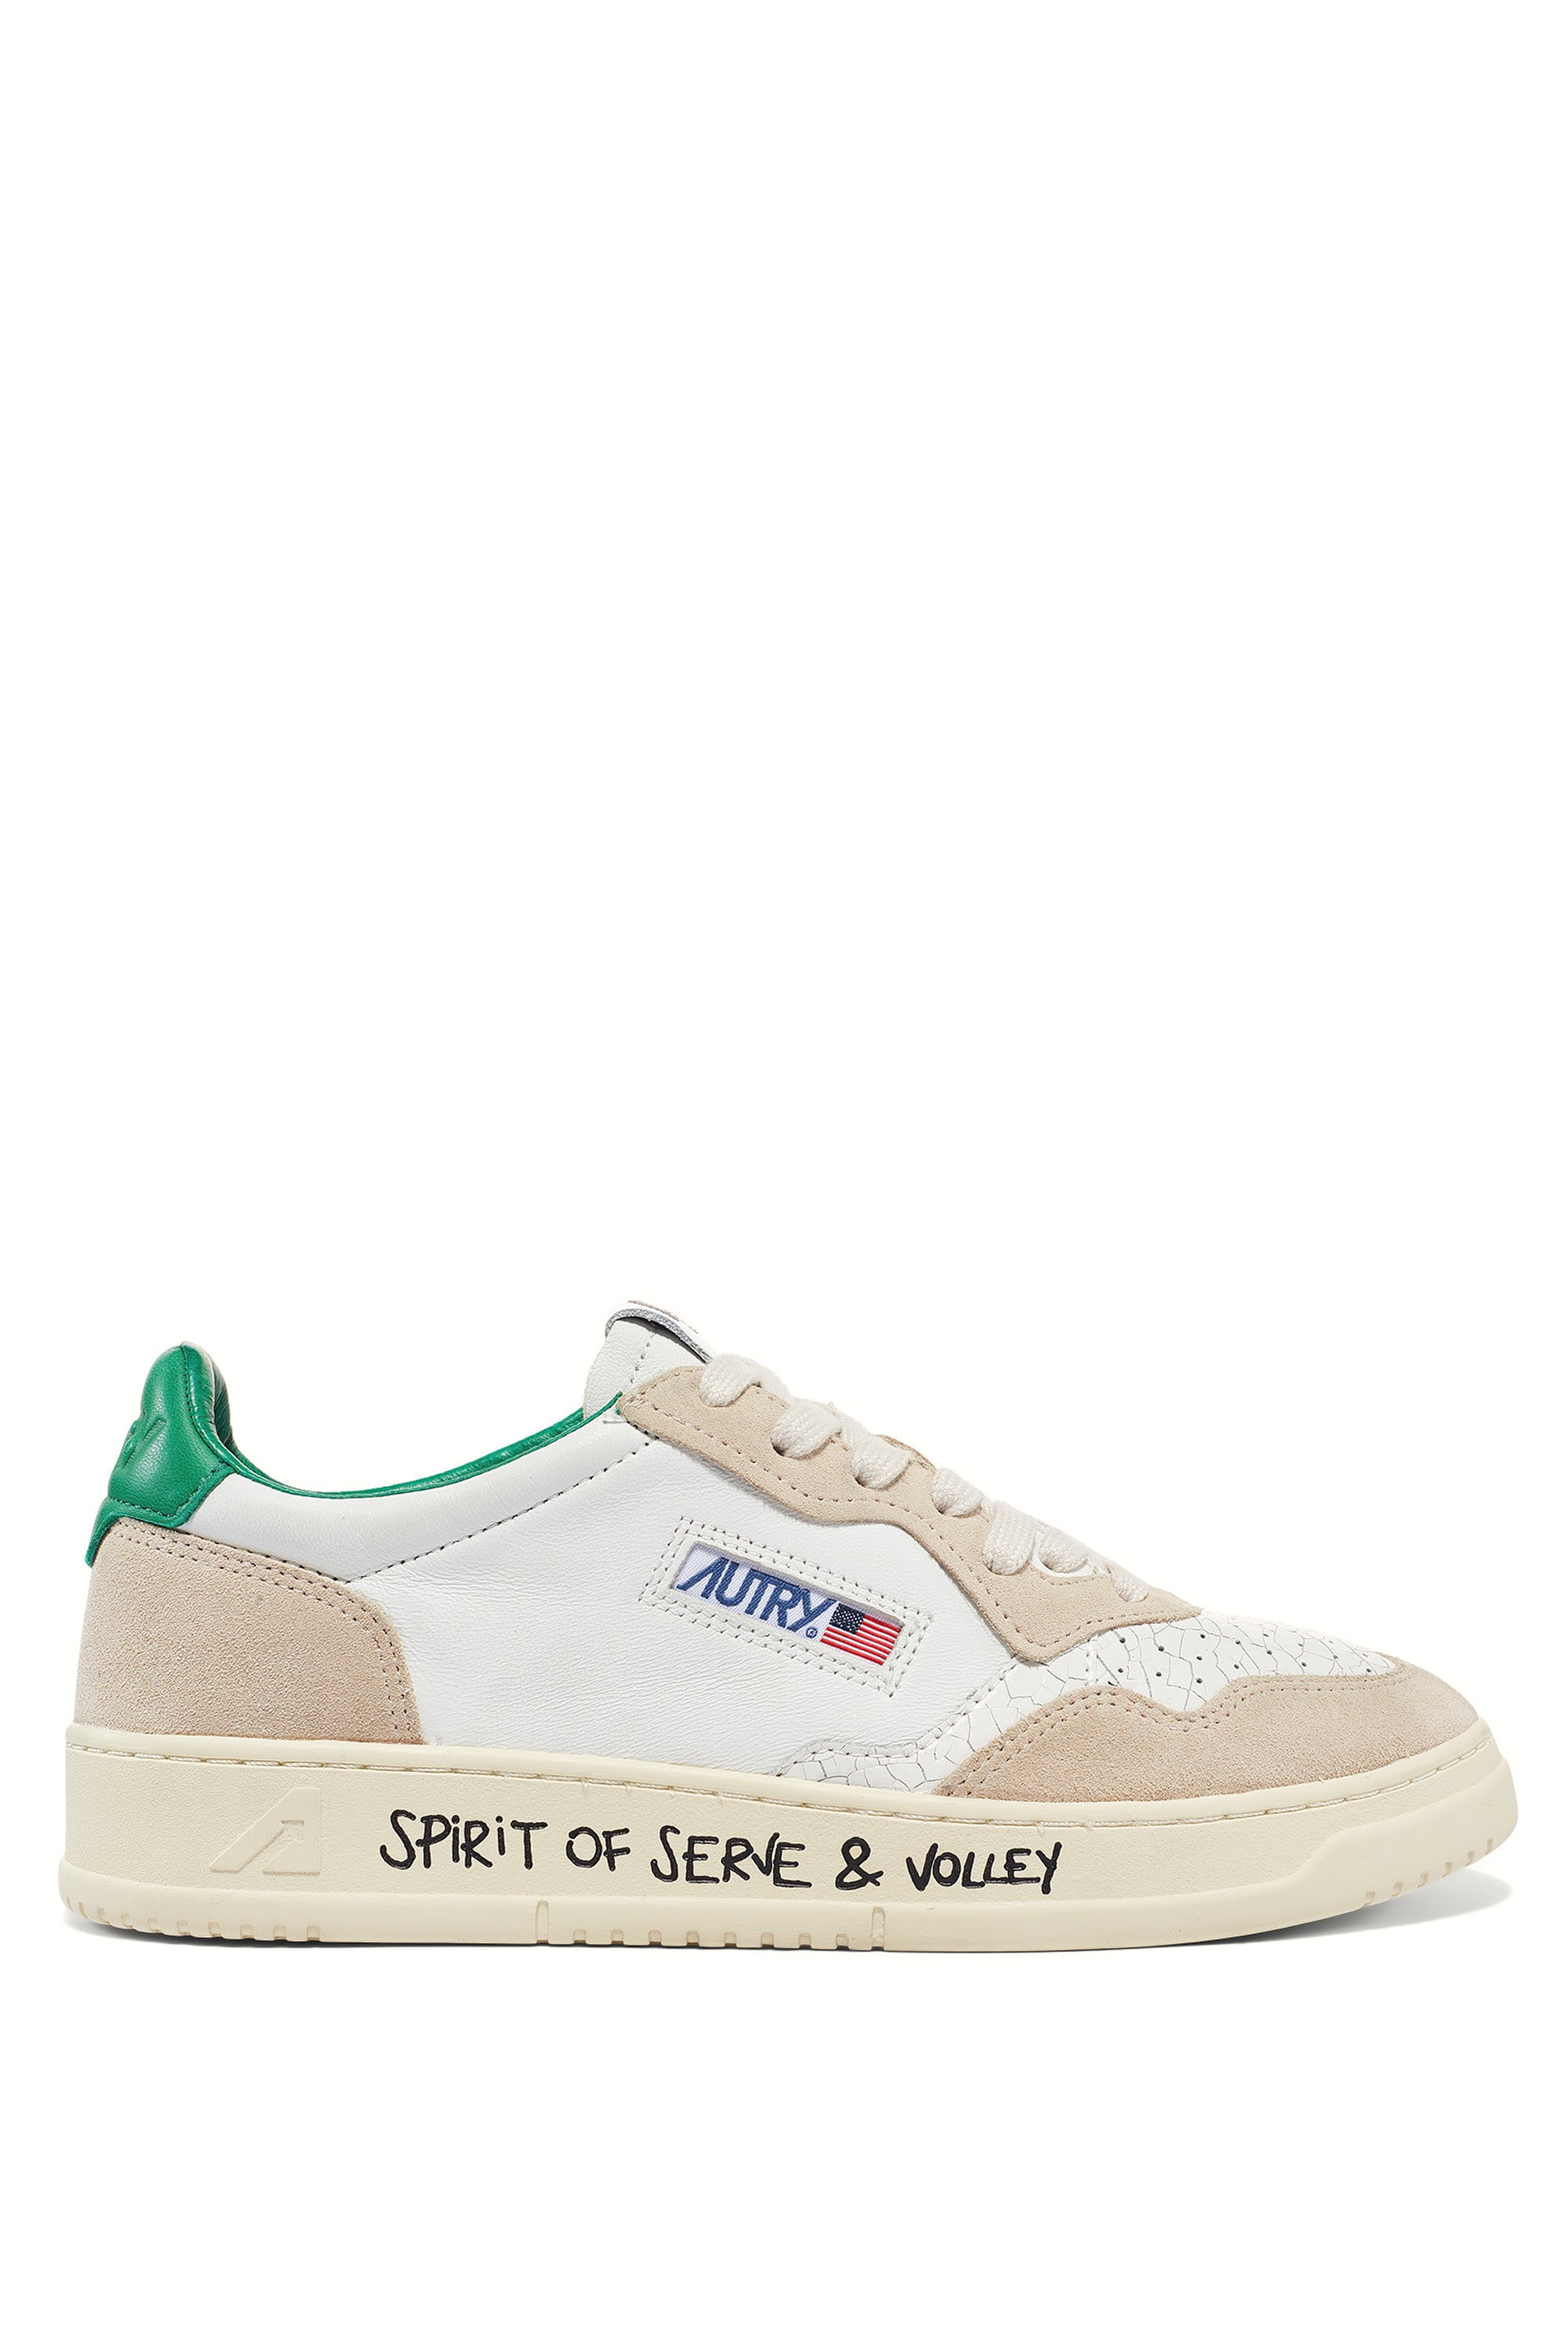 Medalist sneaker with green heel tab and writing